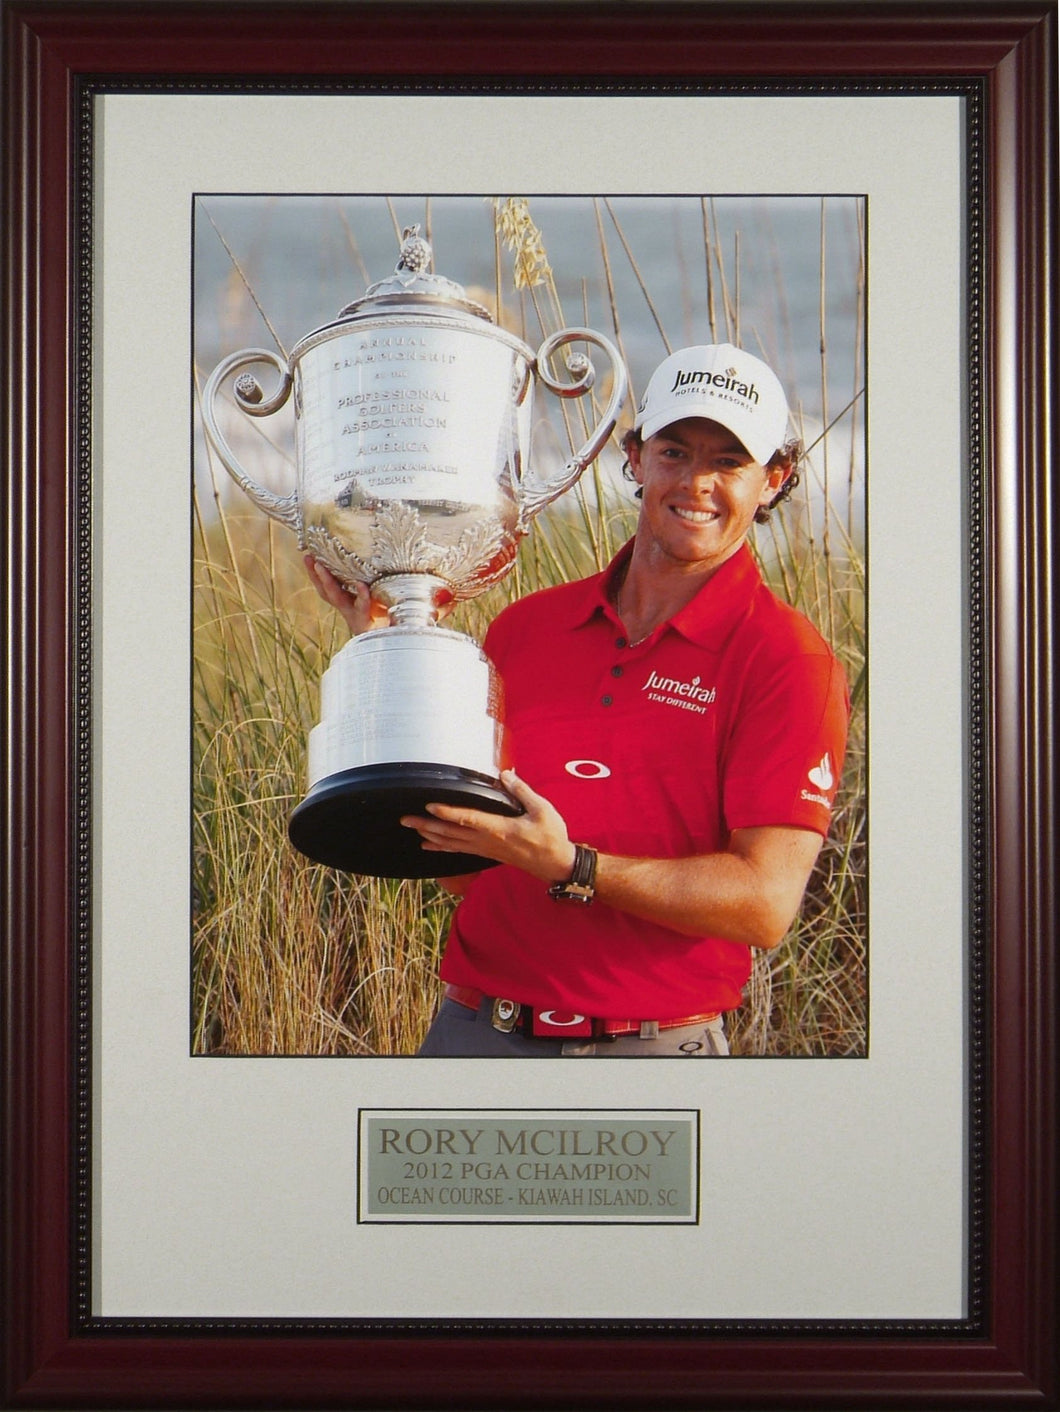 PGA Rory Mcllory Trophy